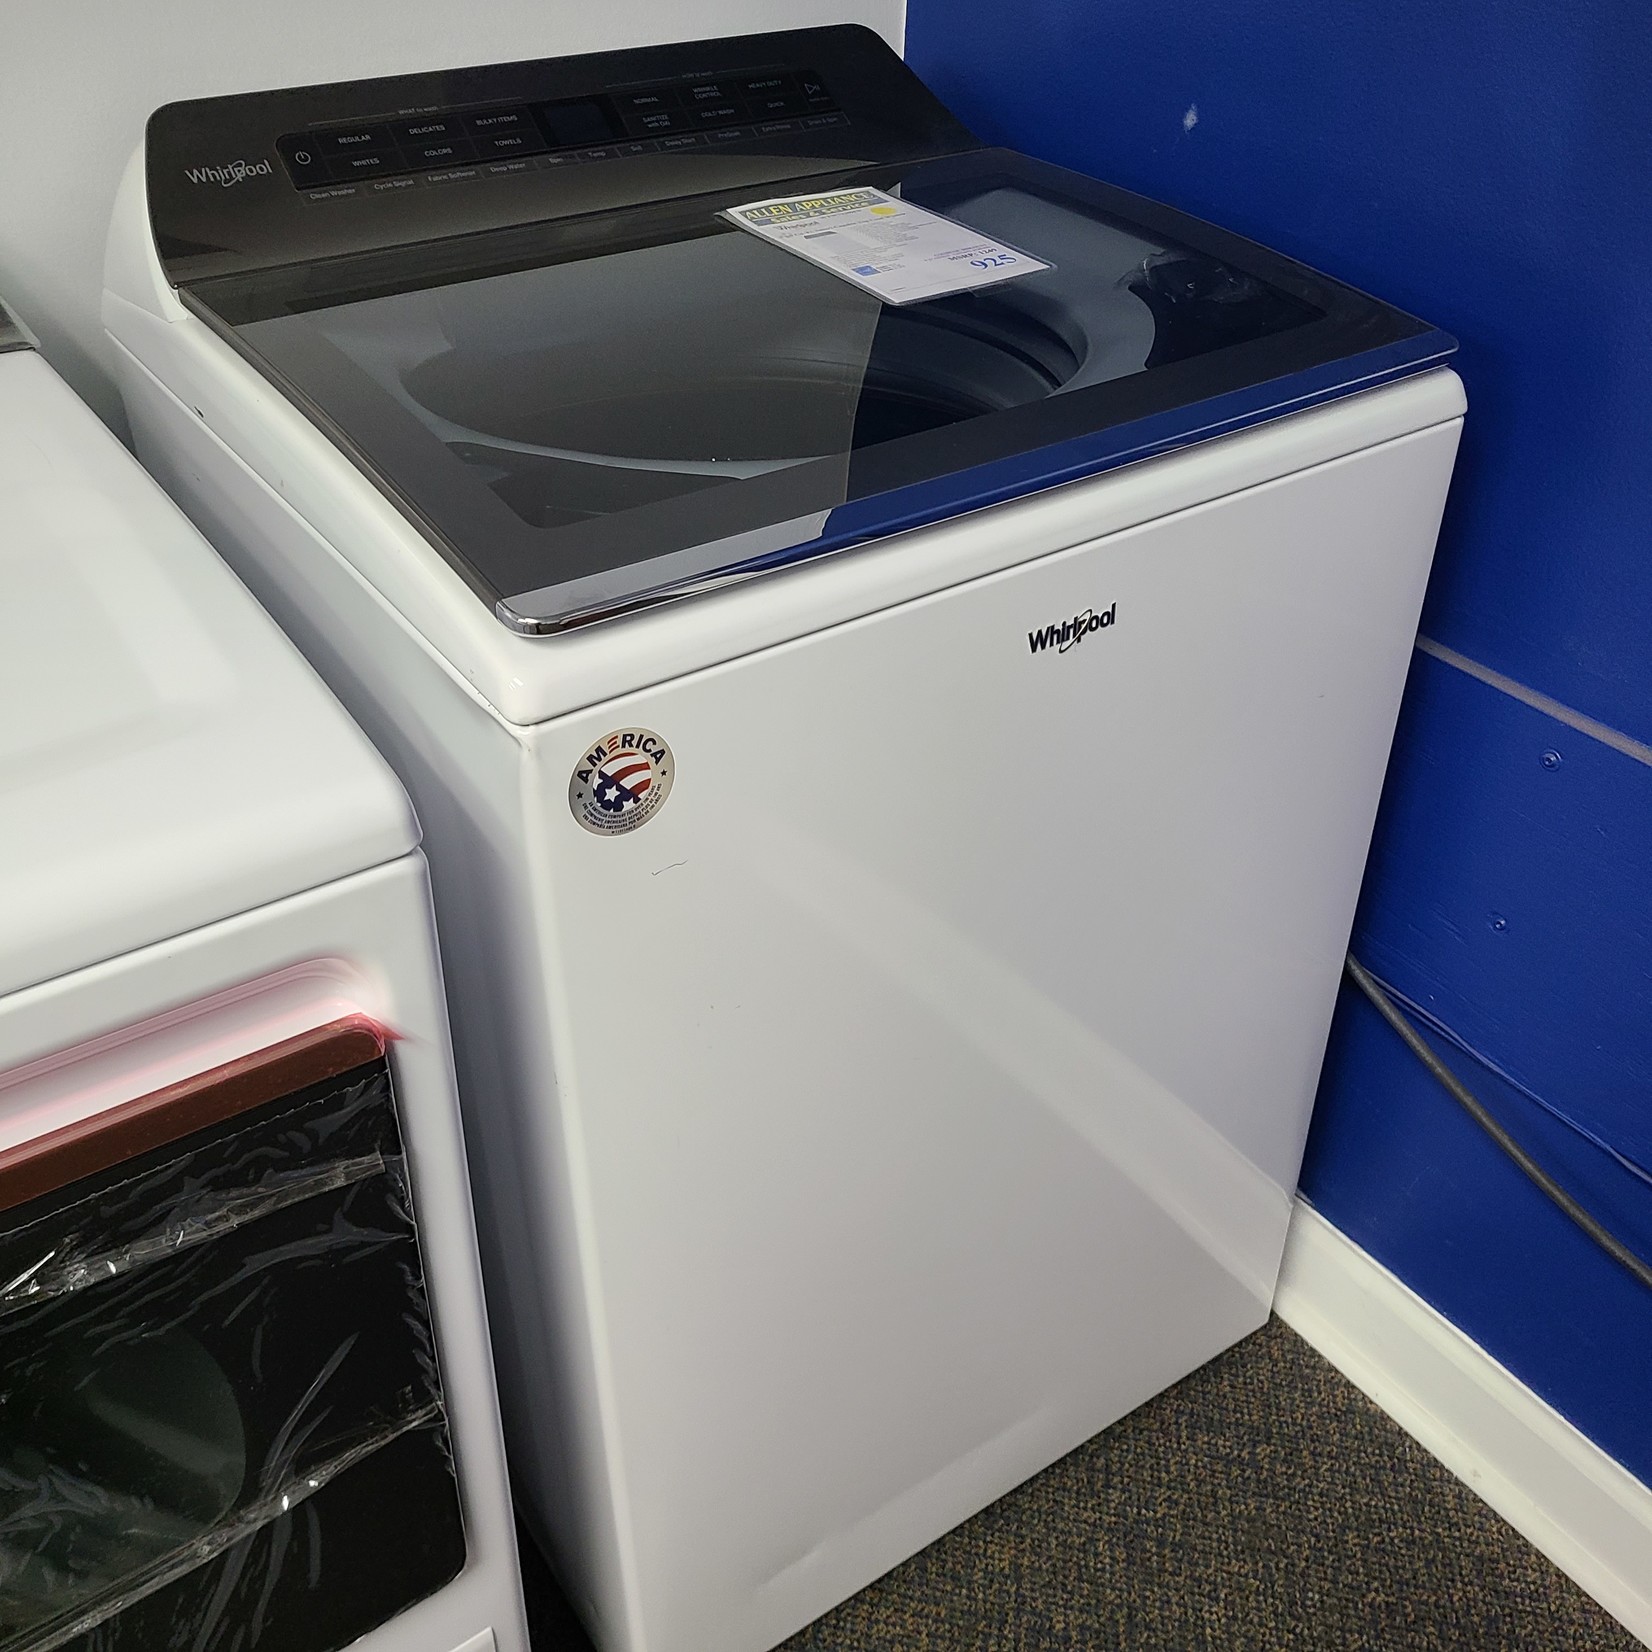 Whirlpool Whirlpool 5.3 Cu. Ft. Smart Capable Top Load Washer WTW7120HW - CA2000672